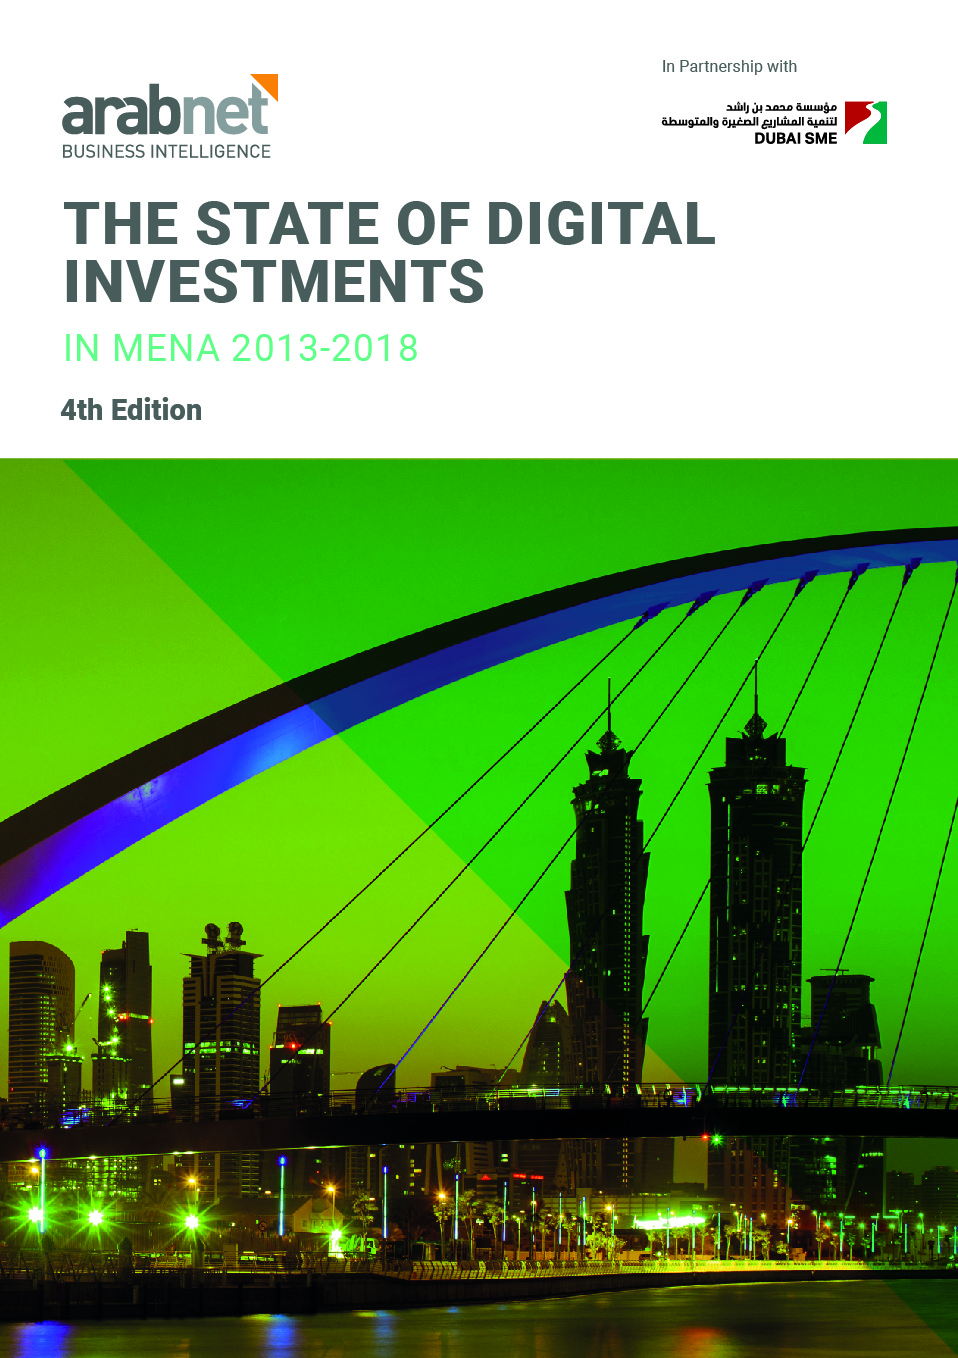 The State of Digital Investments in MENA 2013-2018 Report